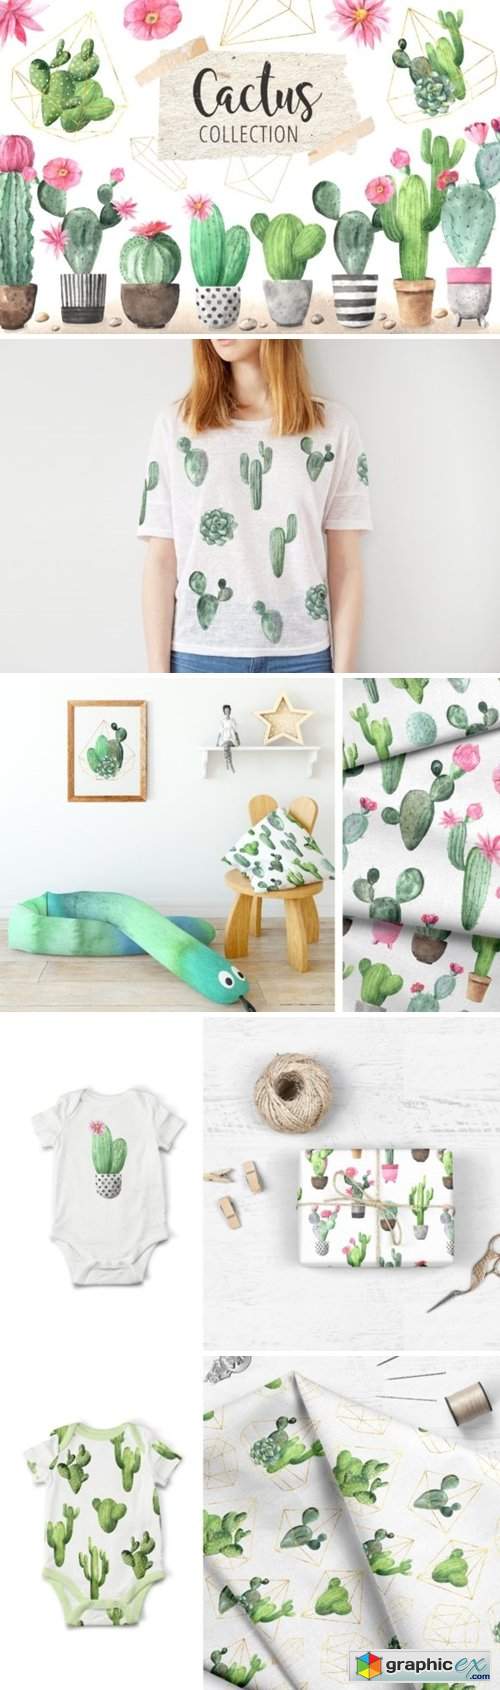  Watercolor Exotic Cactus Collection 